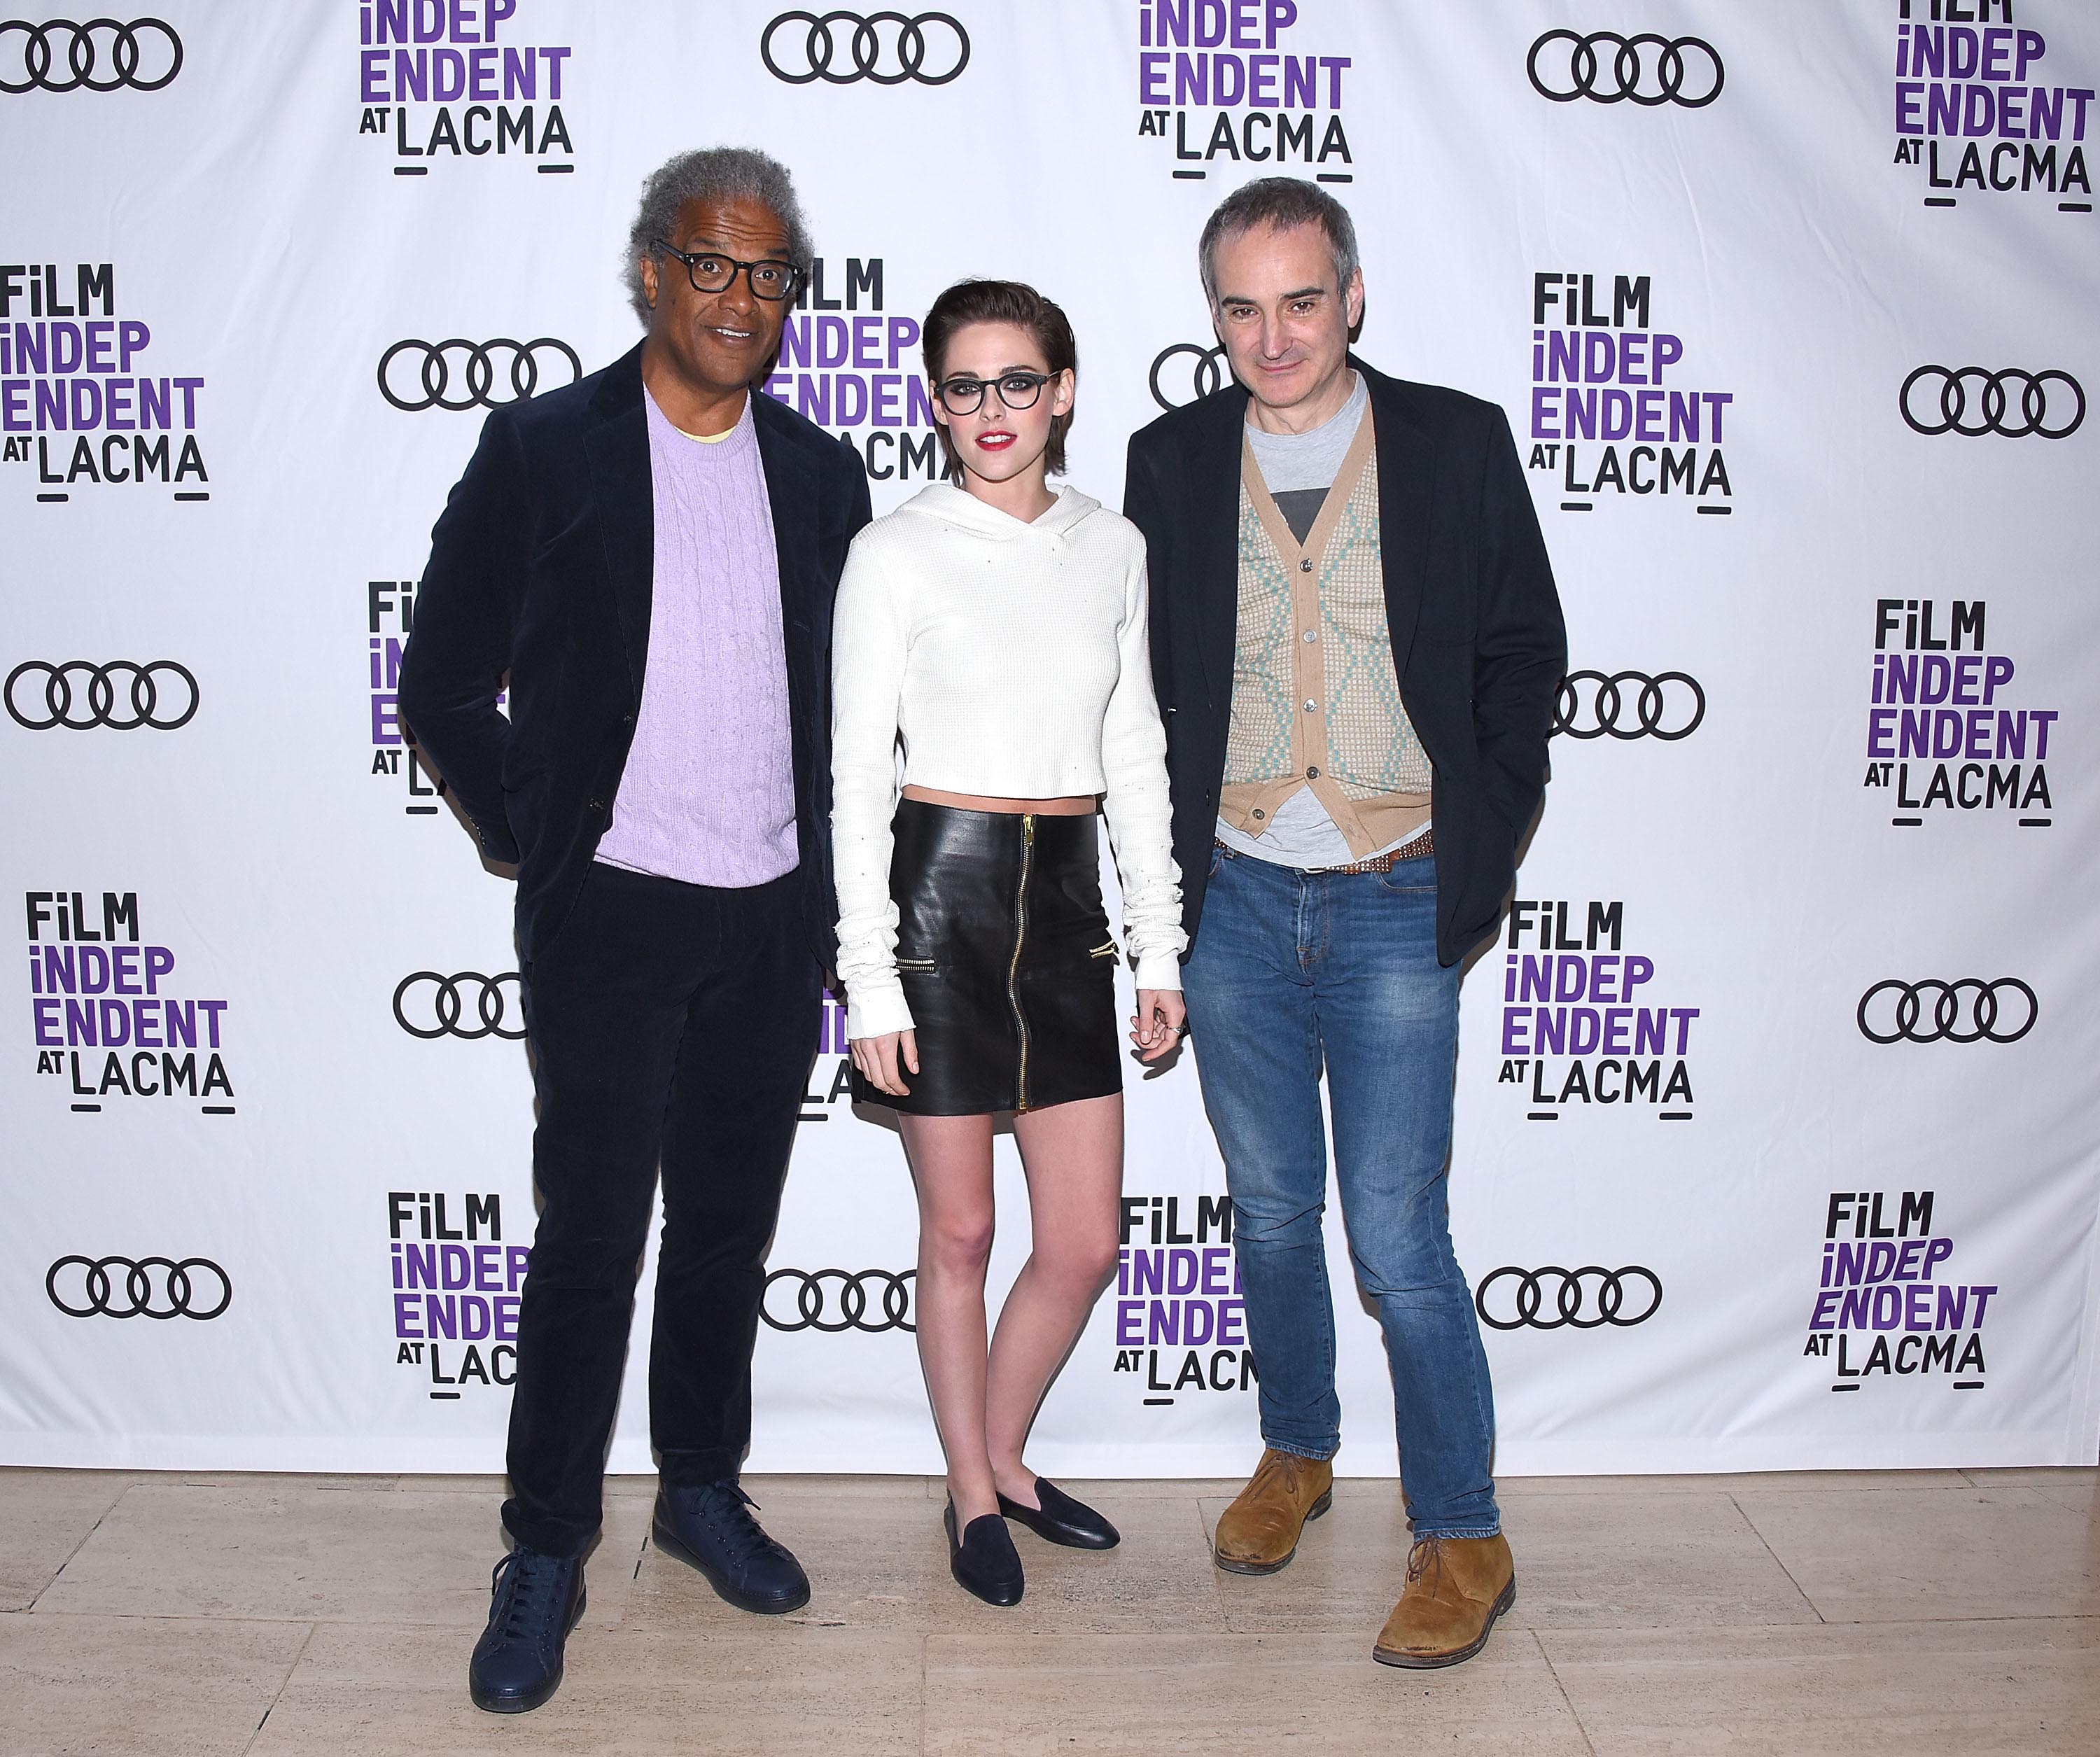 Kristen Stewart attends the Film Independent at LACMA screening